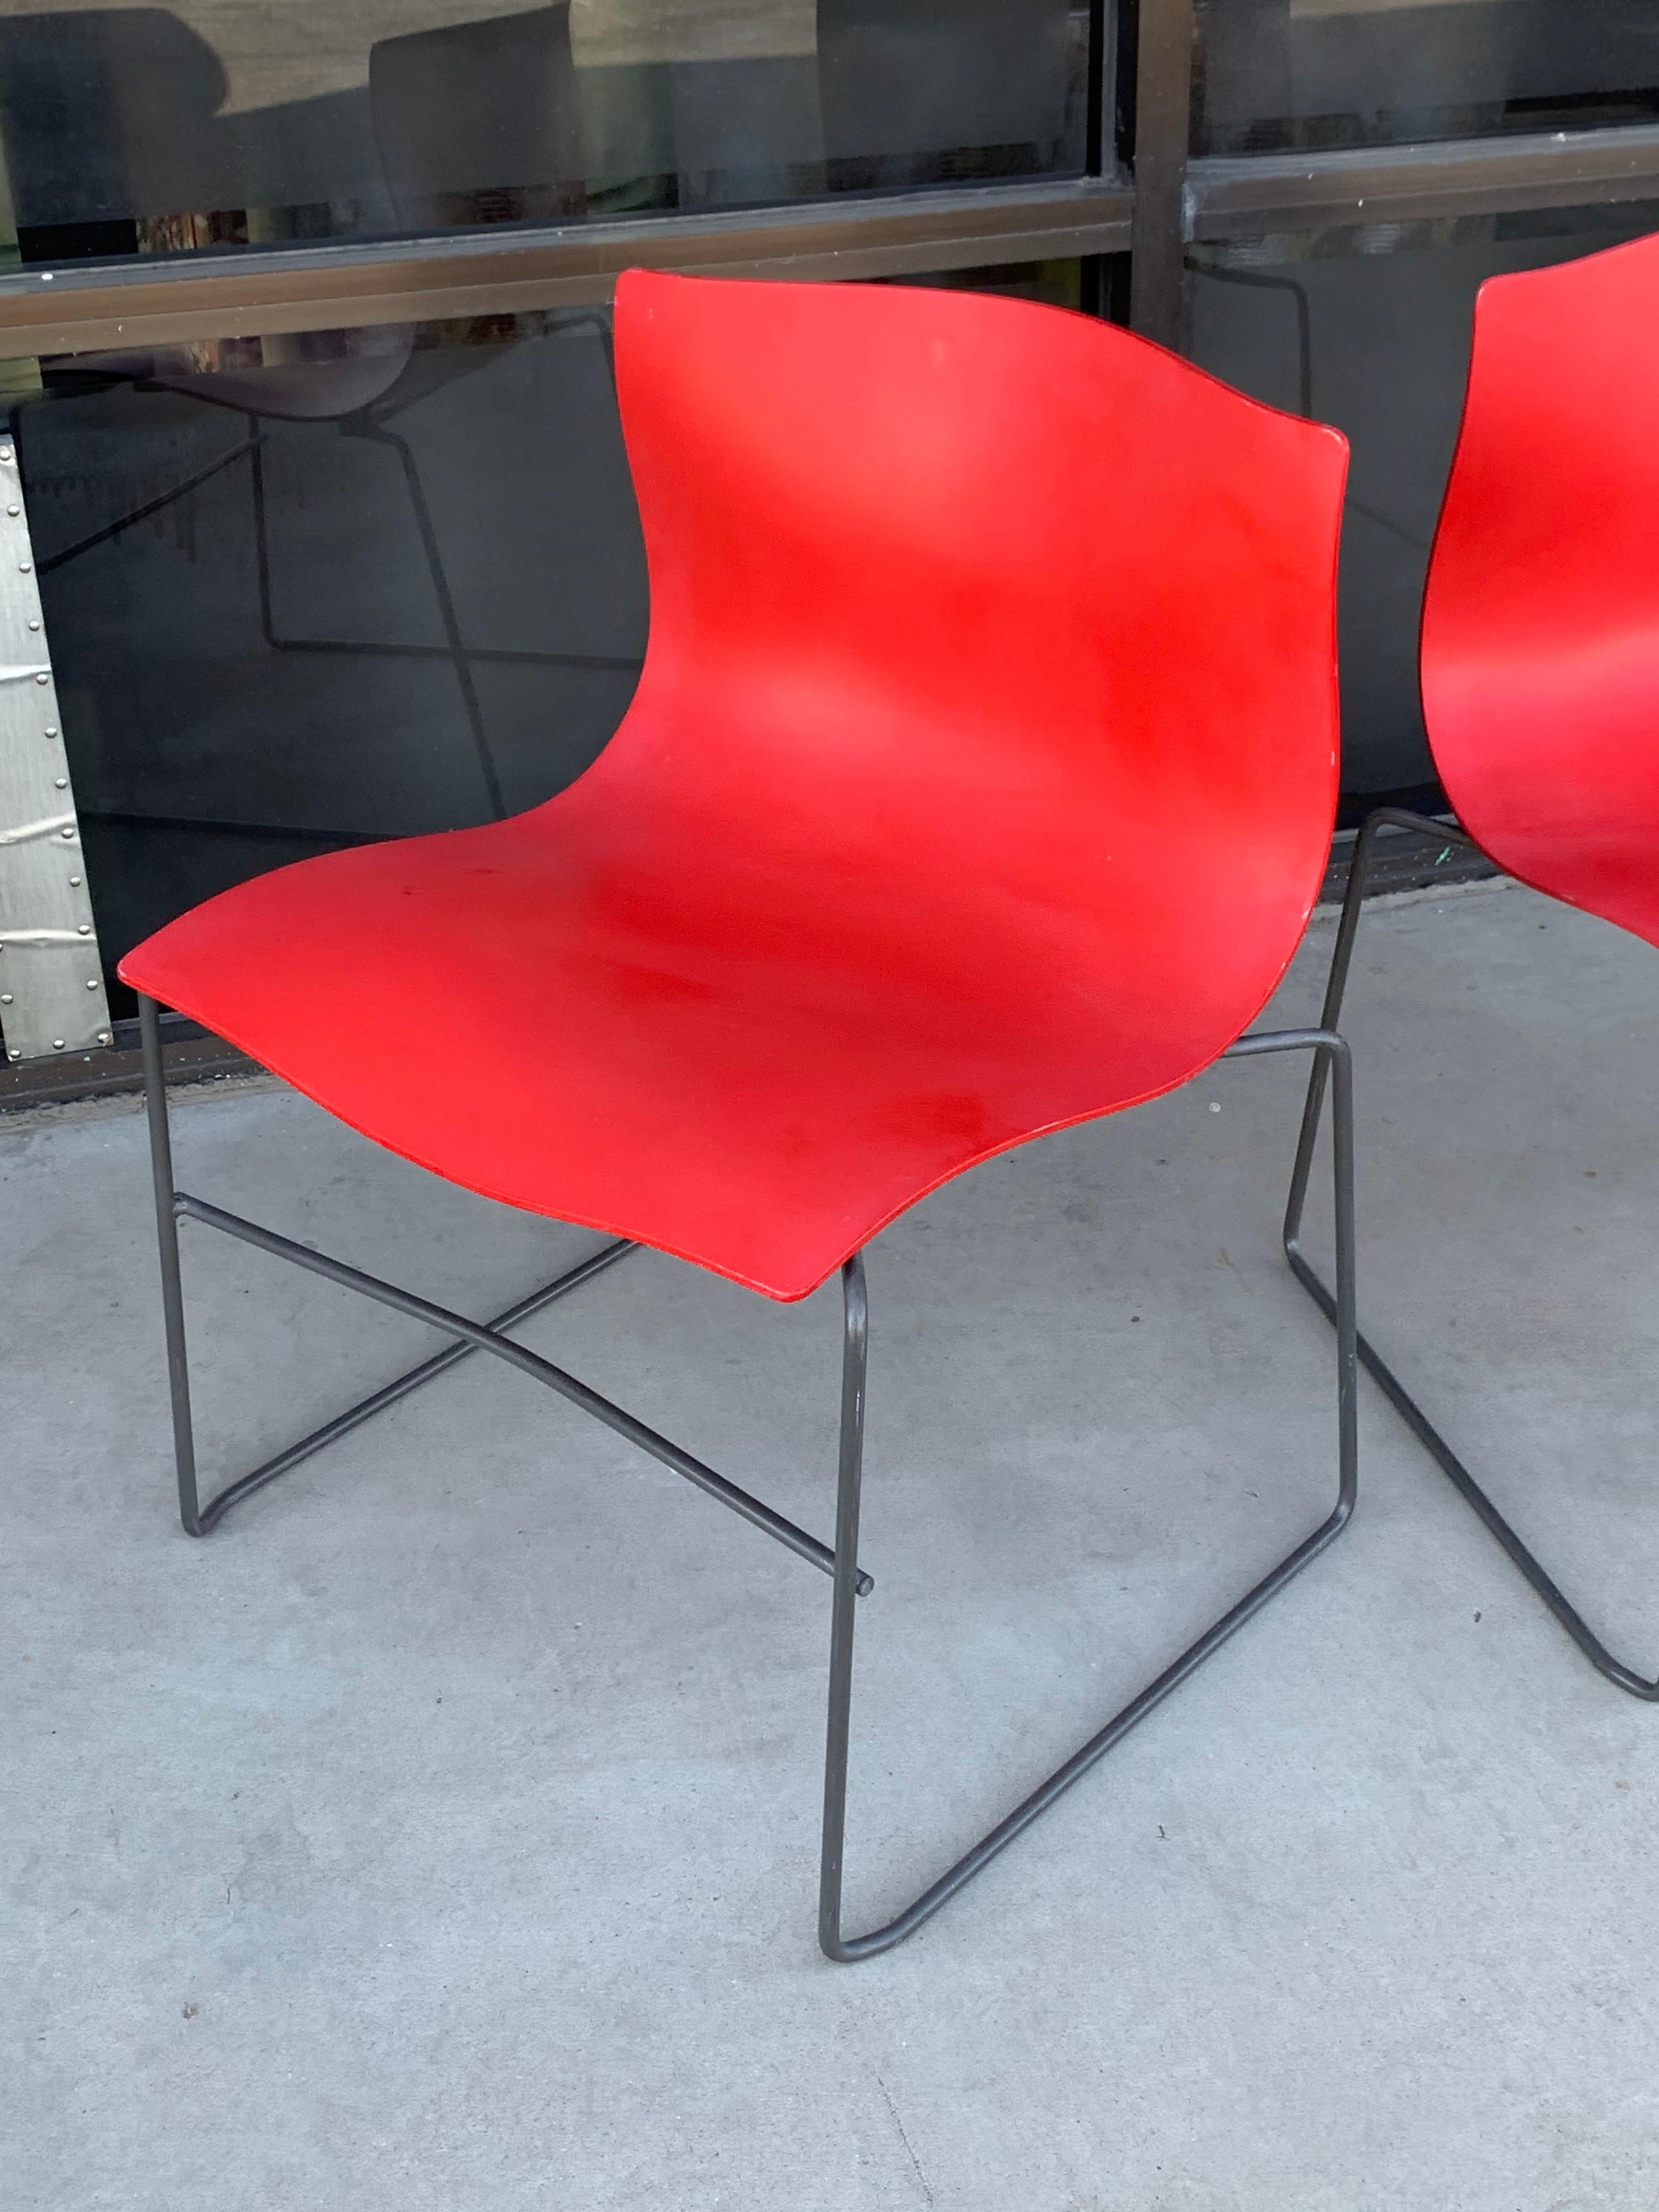 Other Pair of Rare Red Handkerchief Chairs by Massimo Vignelli, 1985